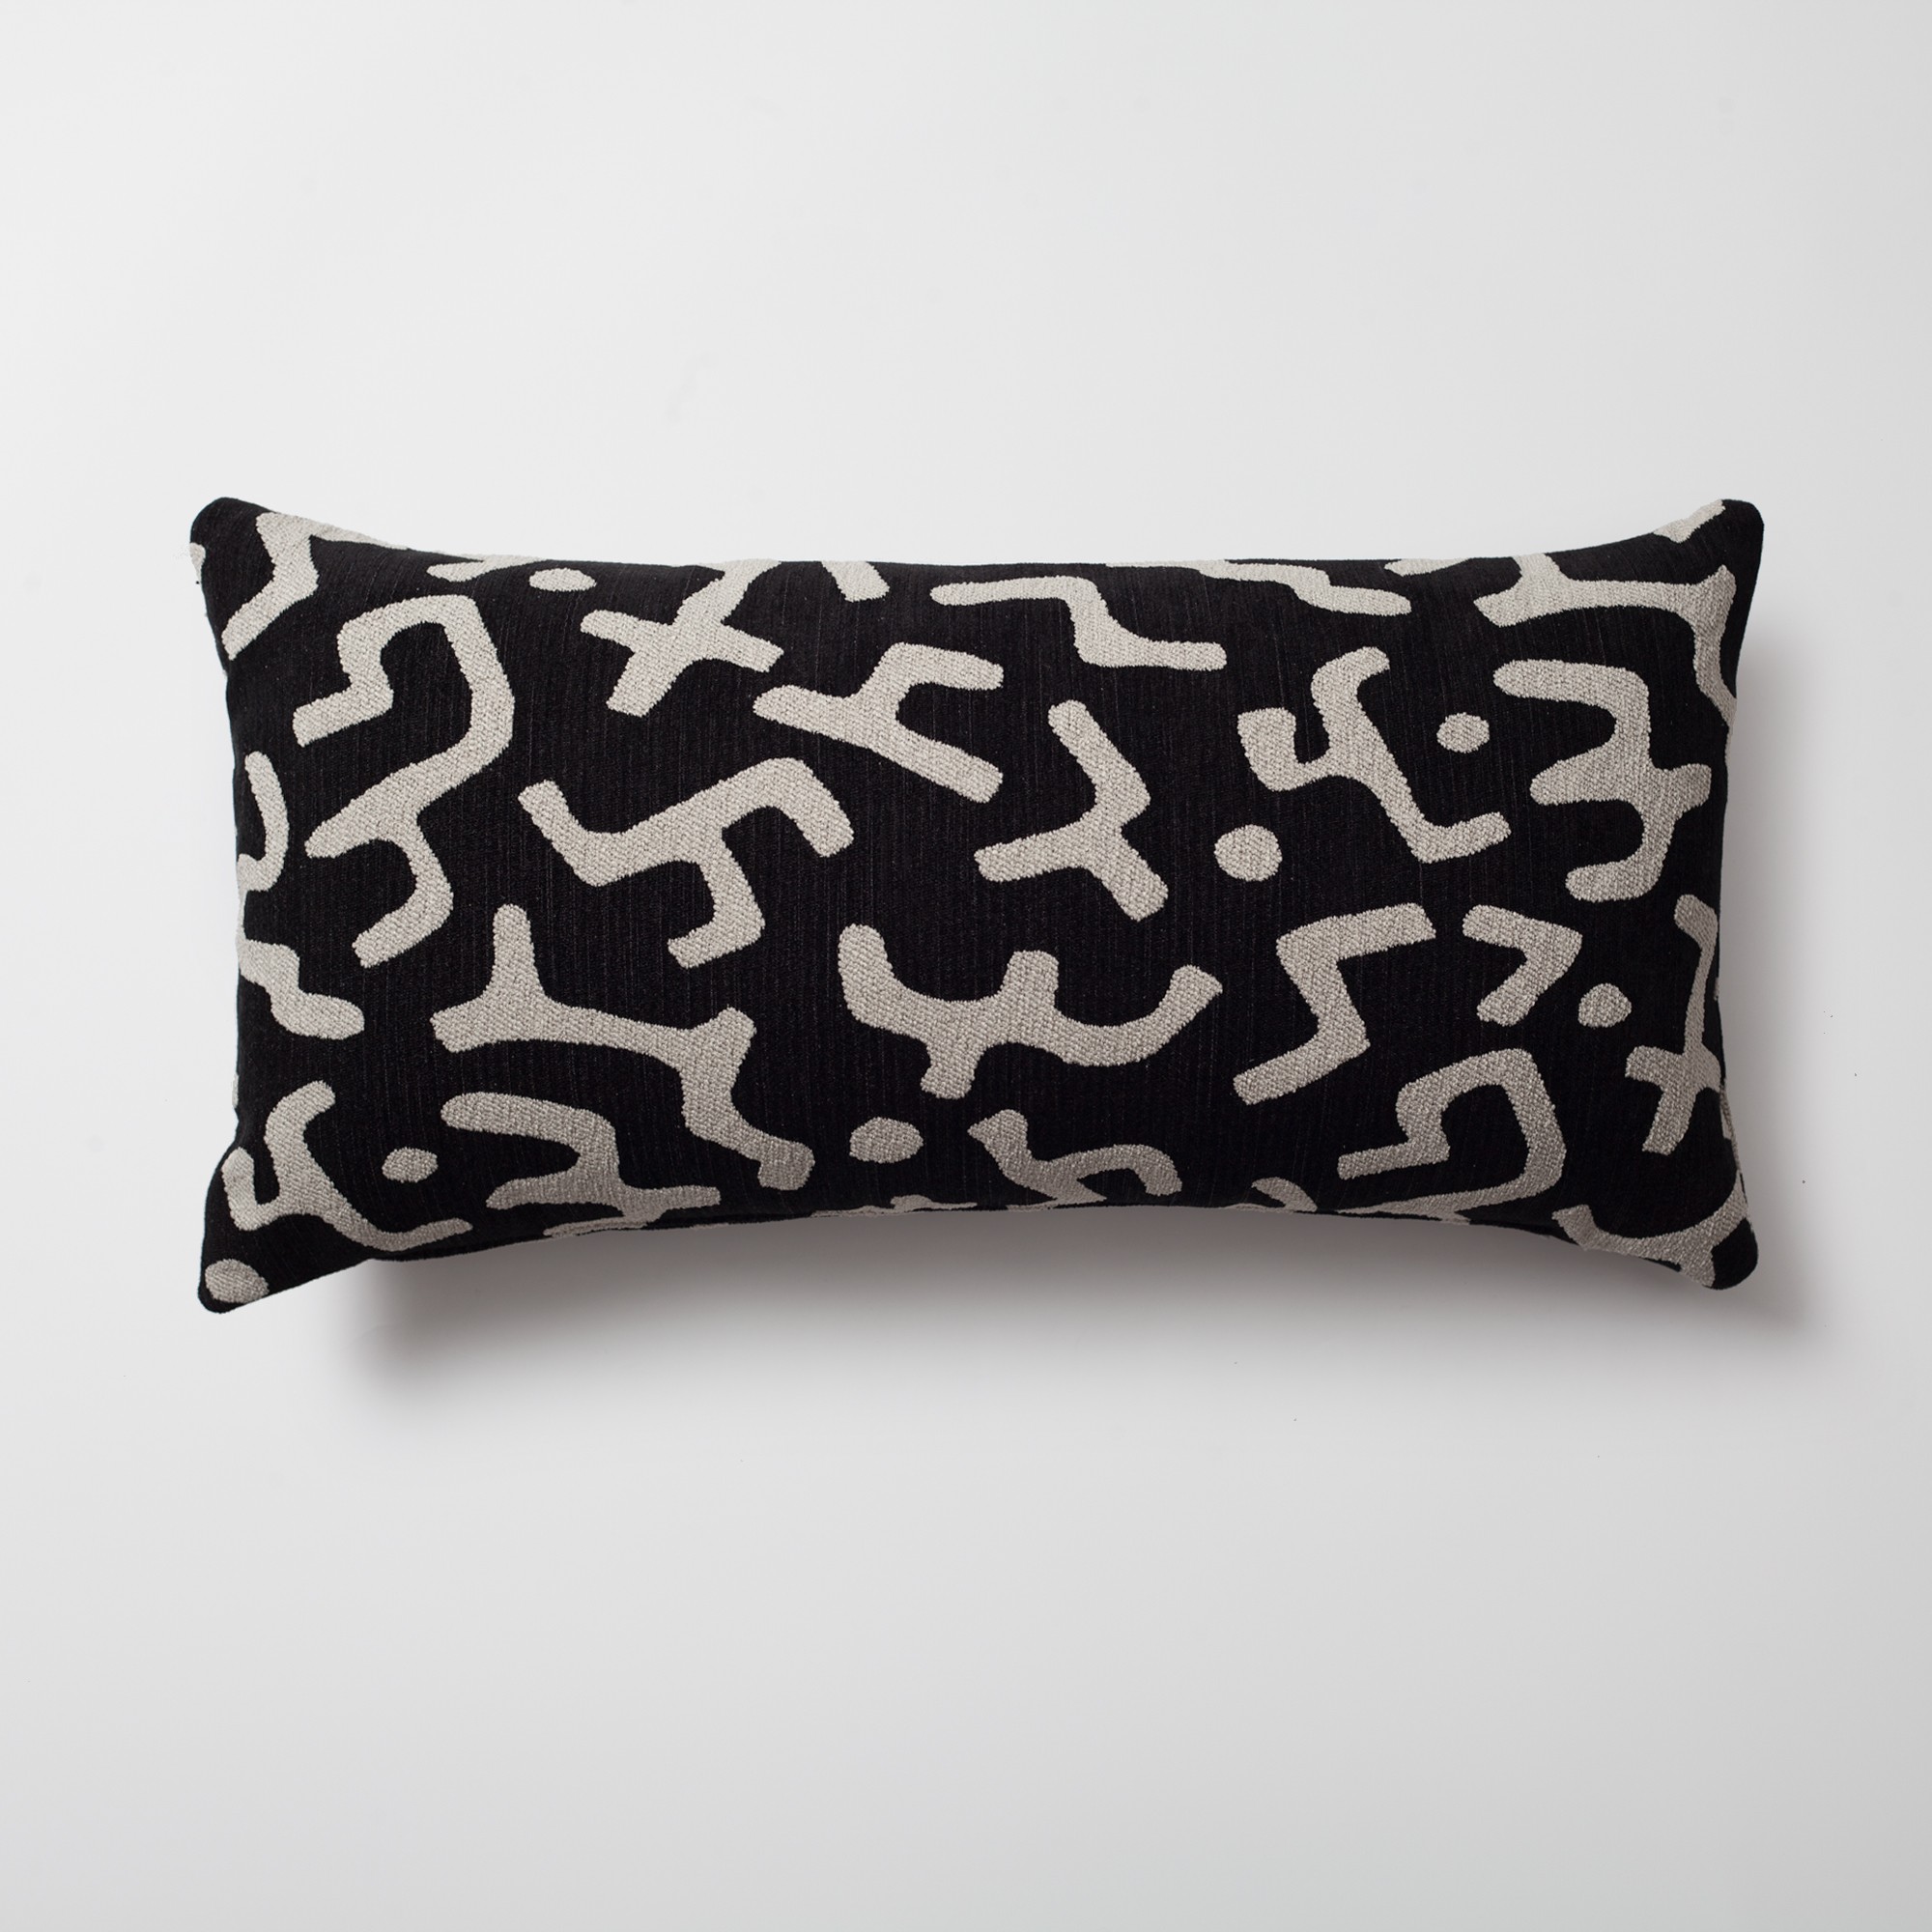 "Nandos" - Maze Patterned 14x28 Inch Pillow - Black (Cover Only)